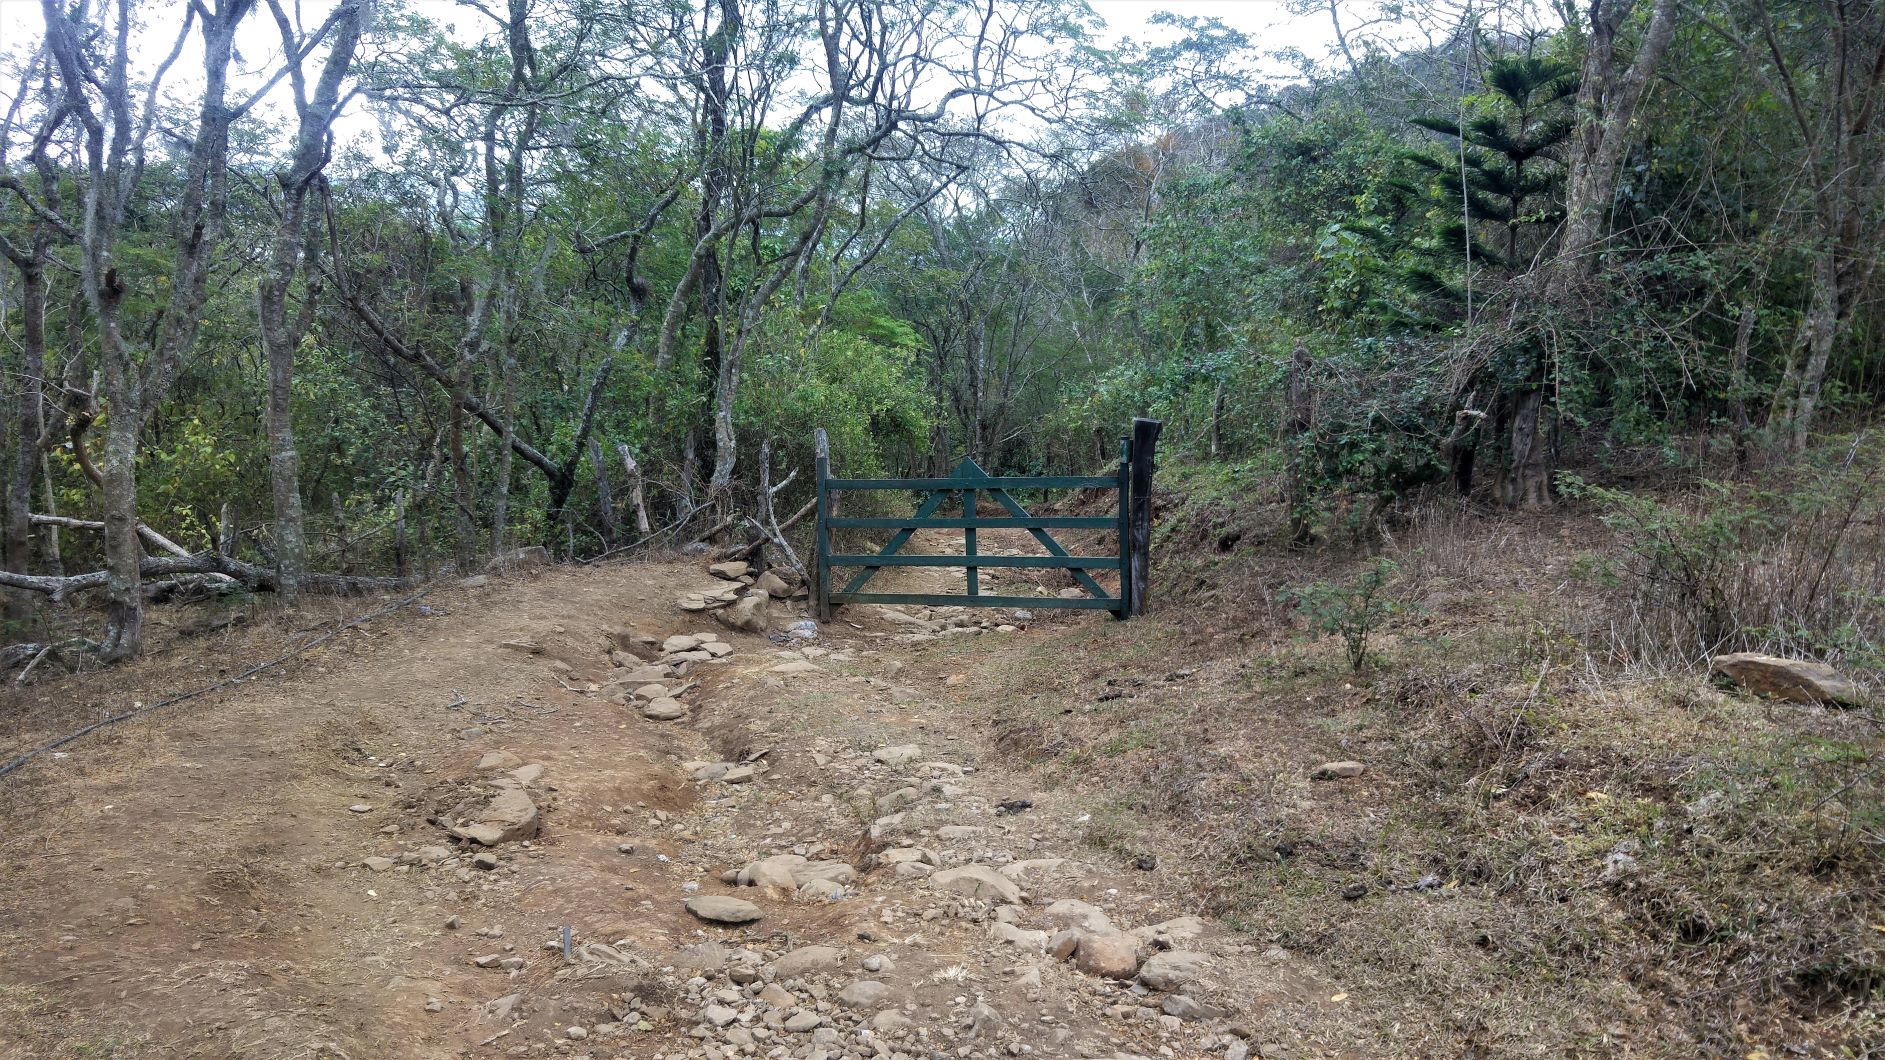 Second gate on the route to find Alberto Gutierrez